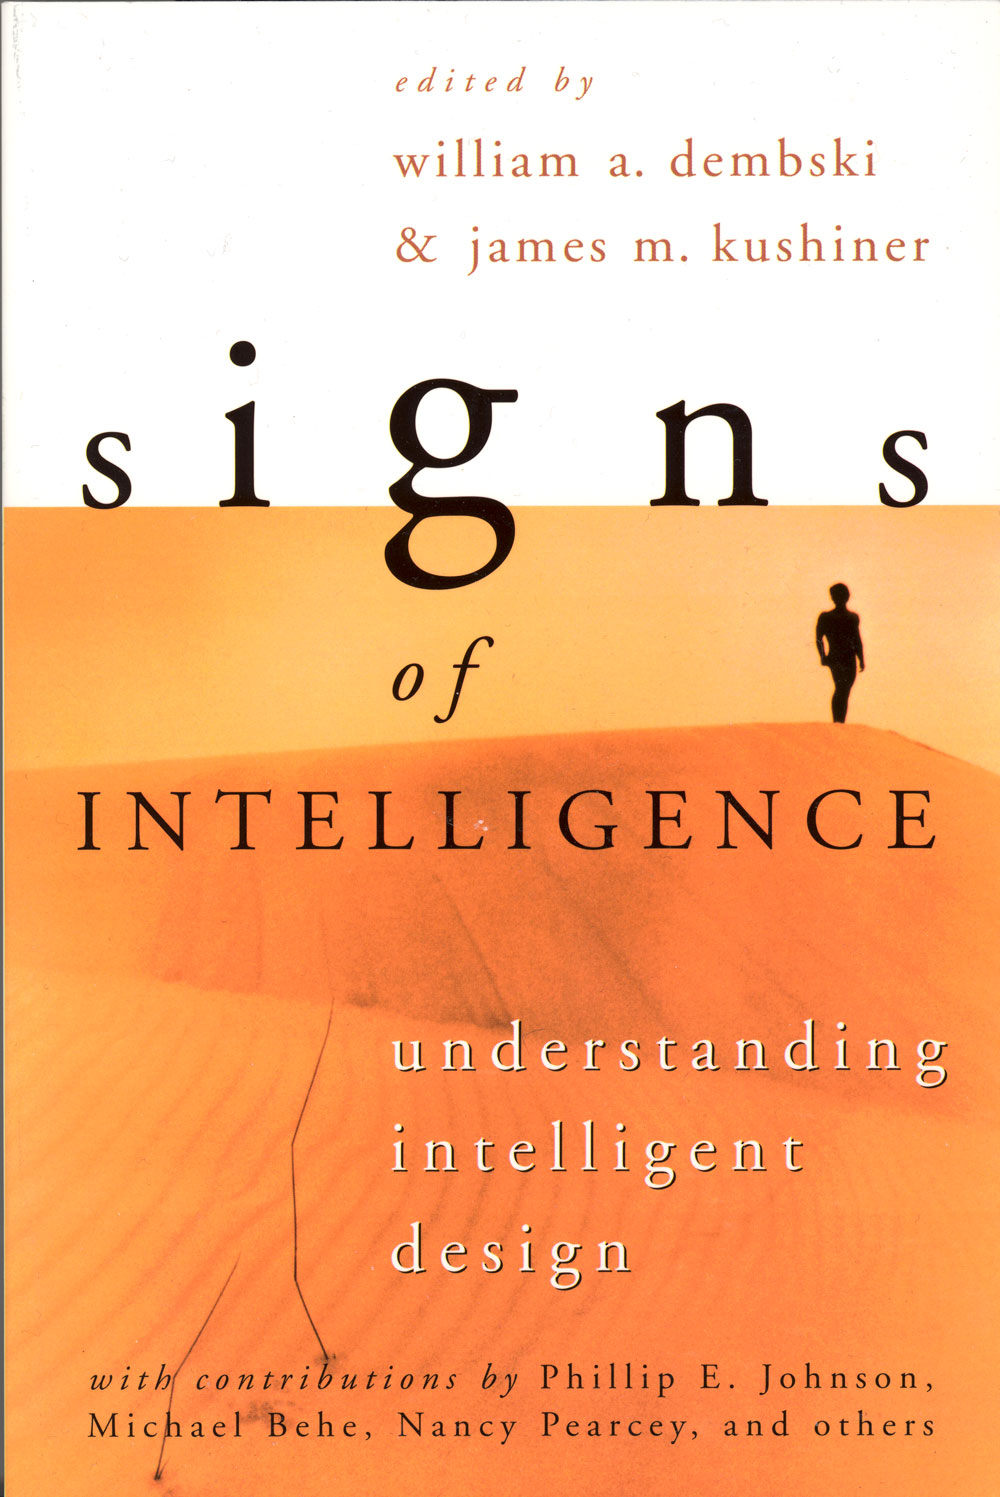 Signs of Intelligence, edited by Dembski and Kushiner